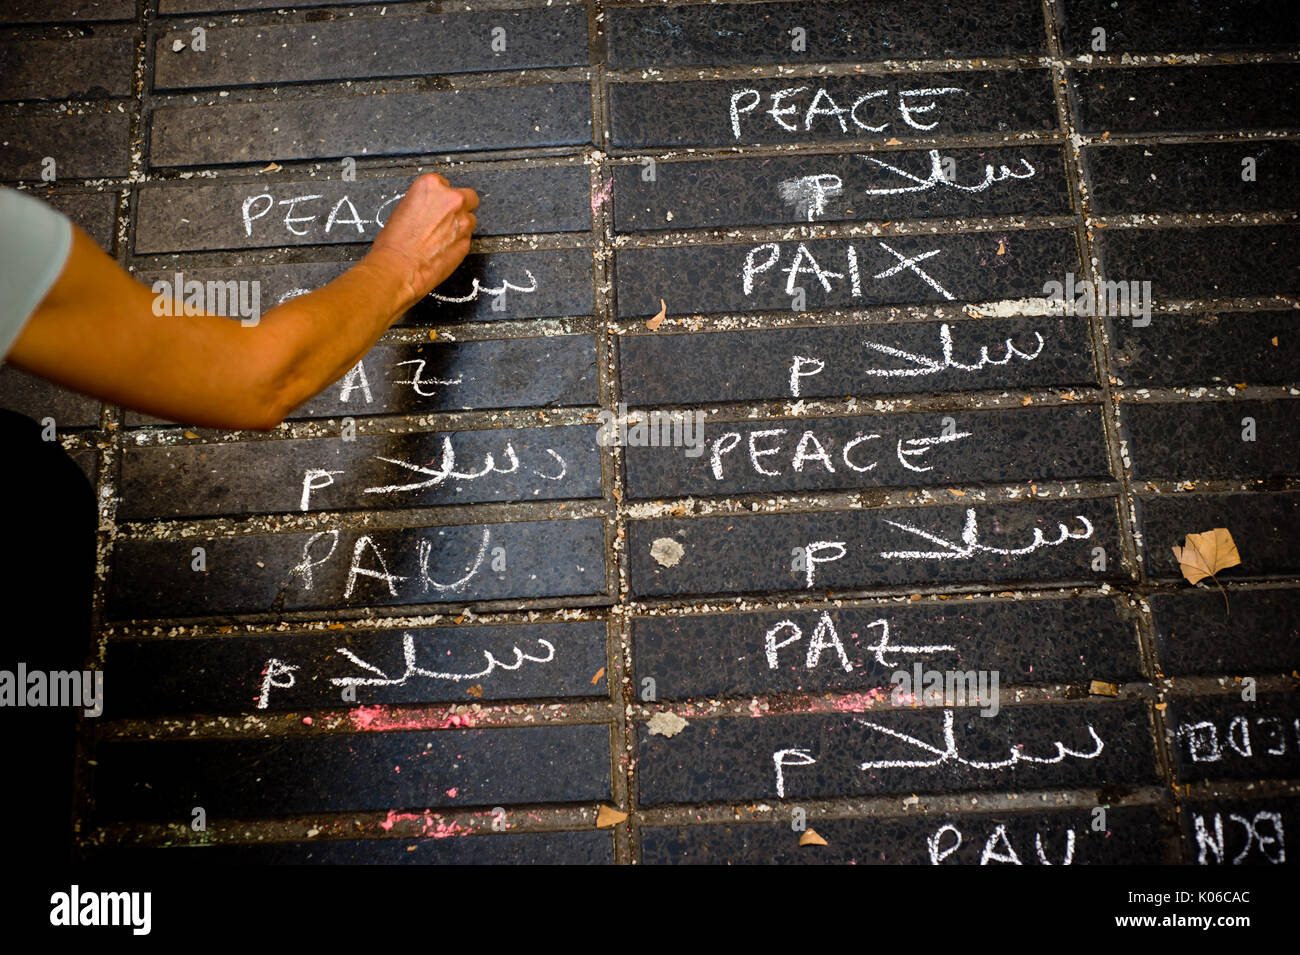 Barcelona, Spain. 21st Aug, 2017. A woman writtes in several languages the word 'peace' on the floor of Las Ramblas in Barcelona the same day that Younes Abouyaaqoub, identified as driver of van that sped down Las Ramblas on Thursday, has been shot dead by Catalan police officers in the village of Subirats. Credit: Jordi Boixareu/Alamy Live News Stock Photo